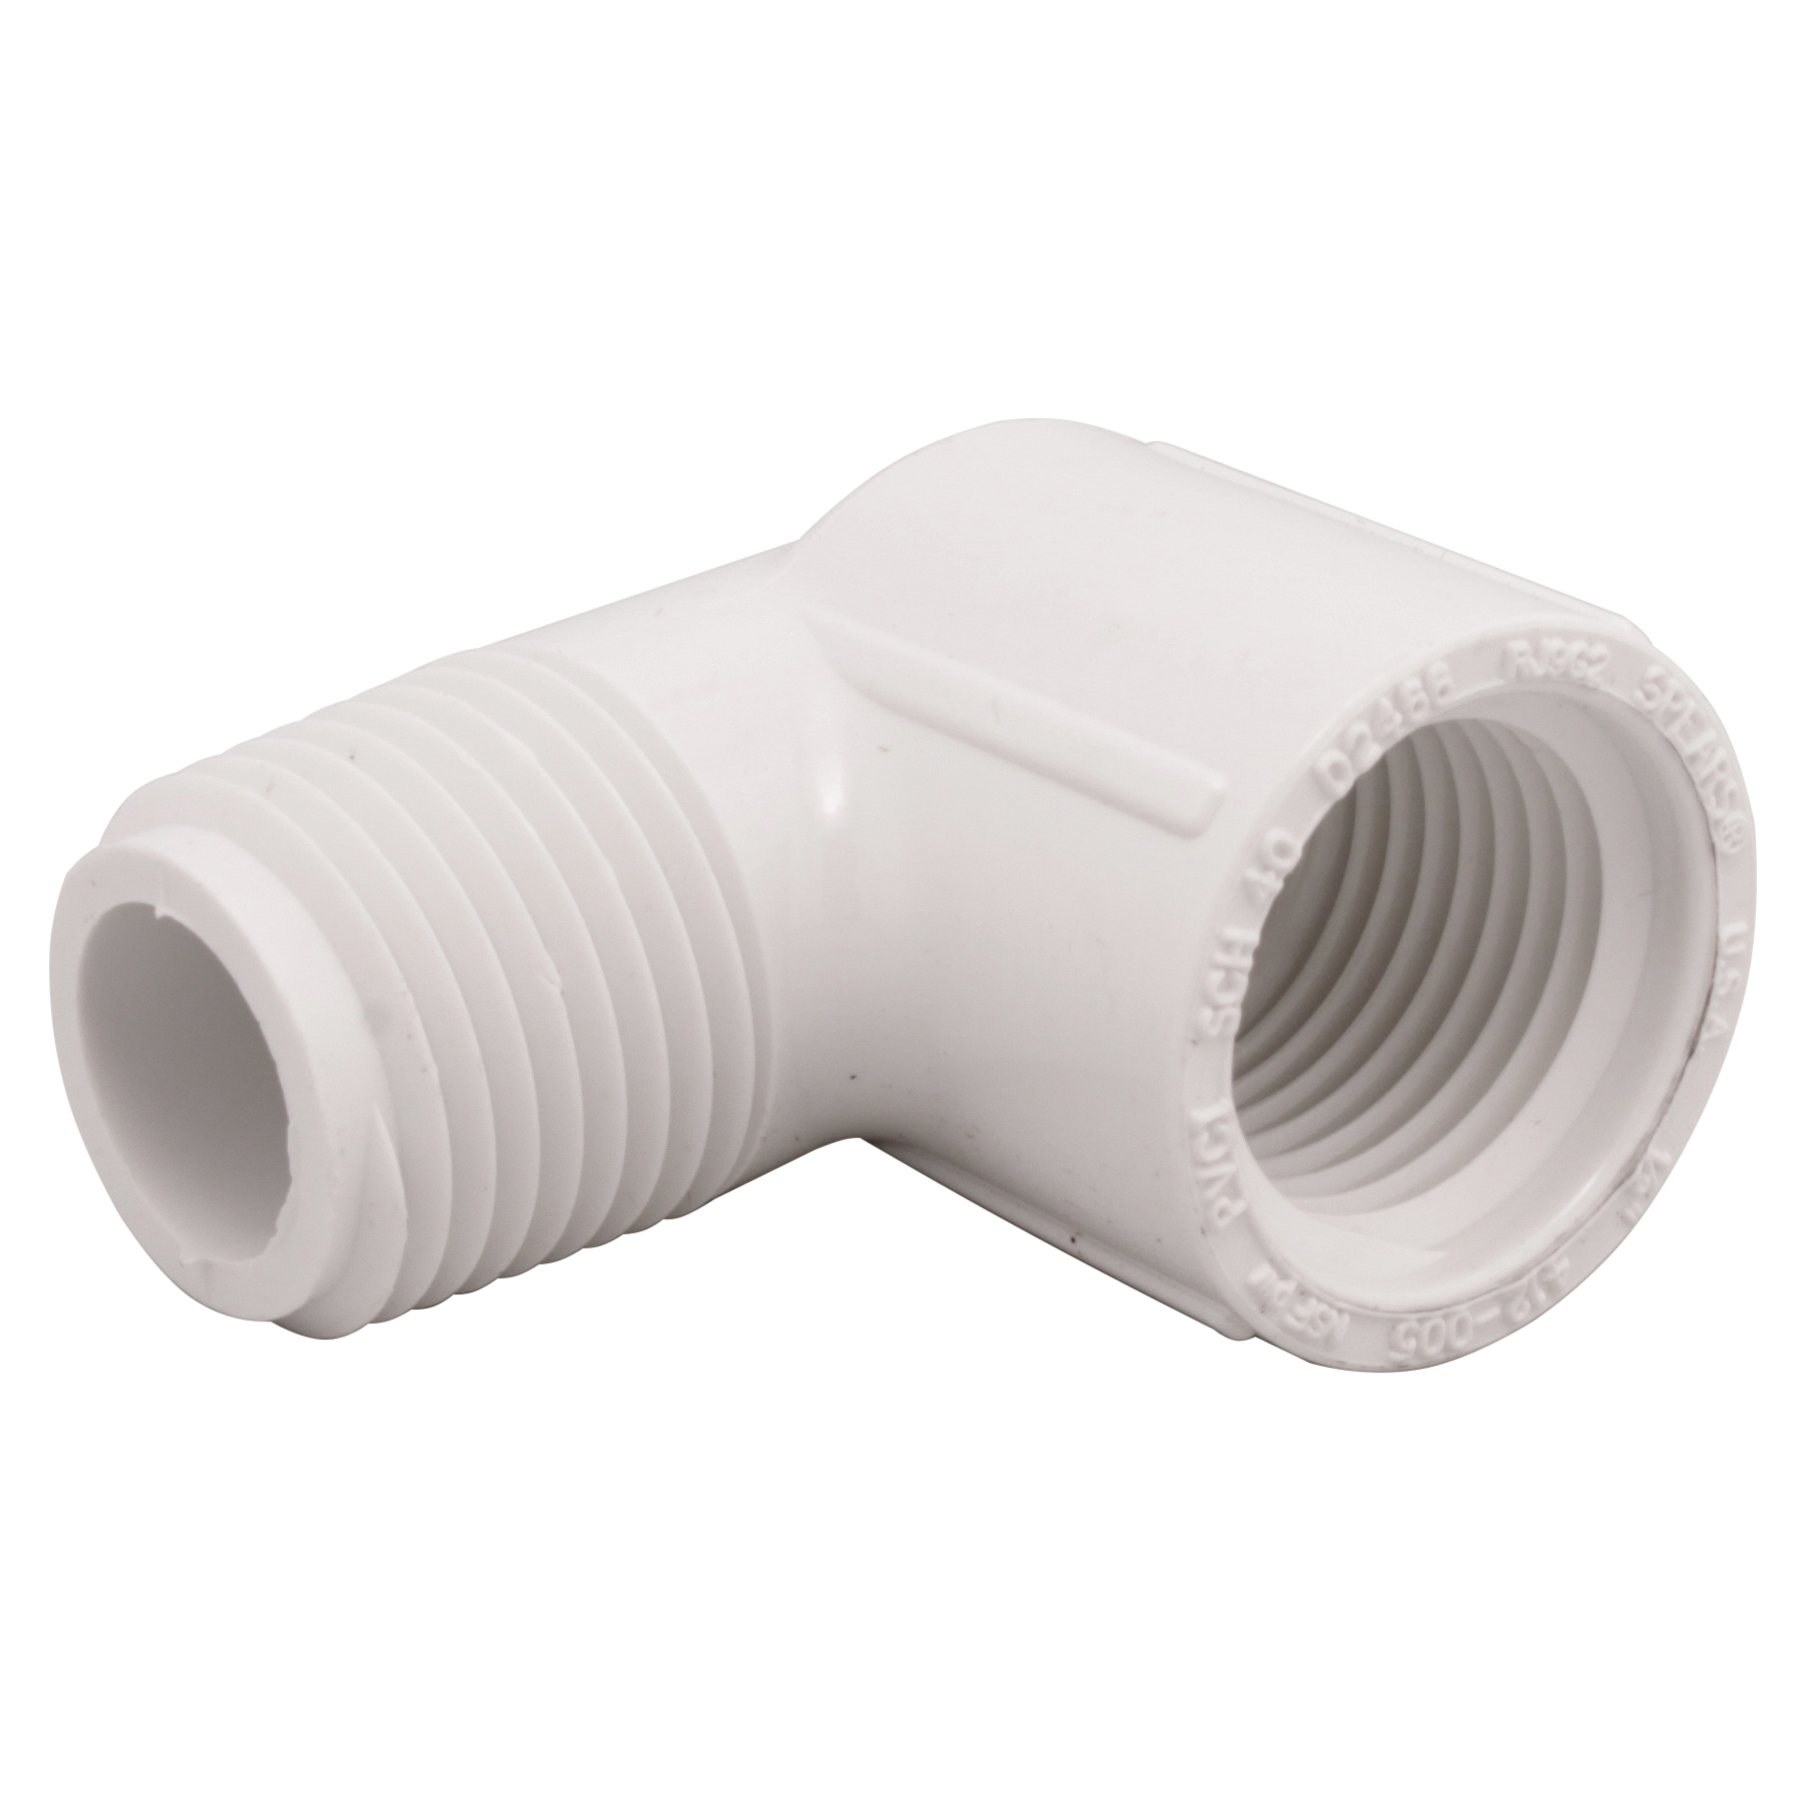 435553 Street Pipe Elbow, 3/4 x 3/4 in, MPT x FPT, 90 deg Angle, PVC, White, SCH 40 Schedule